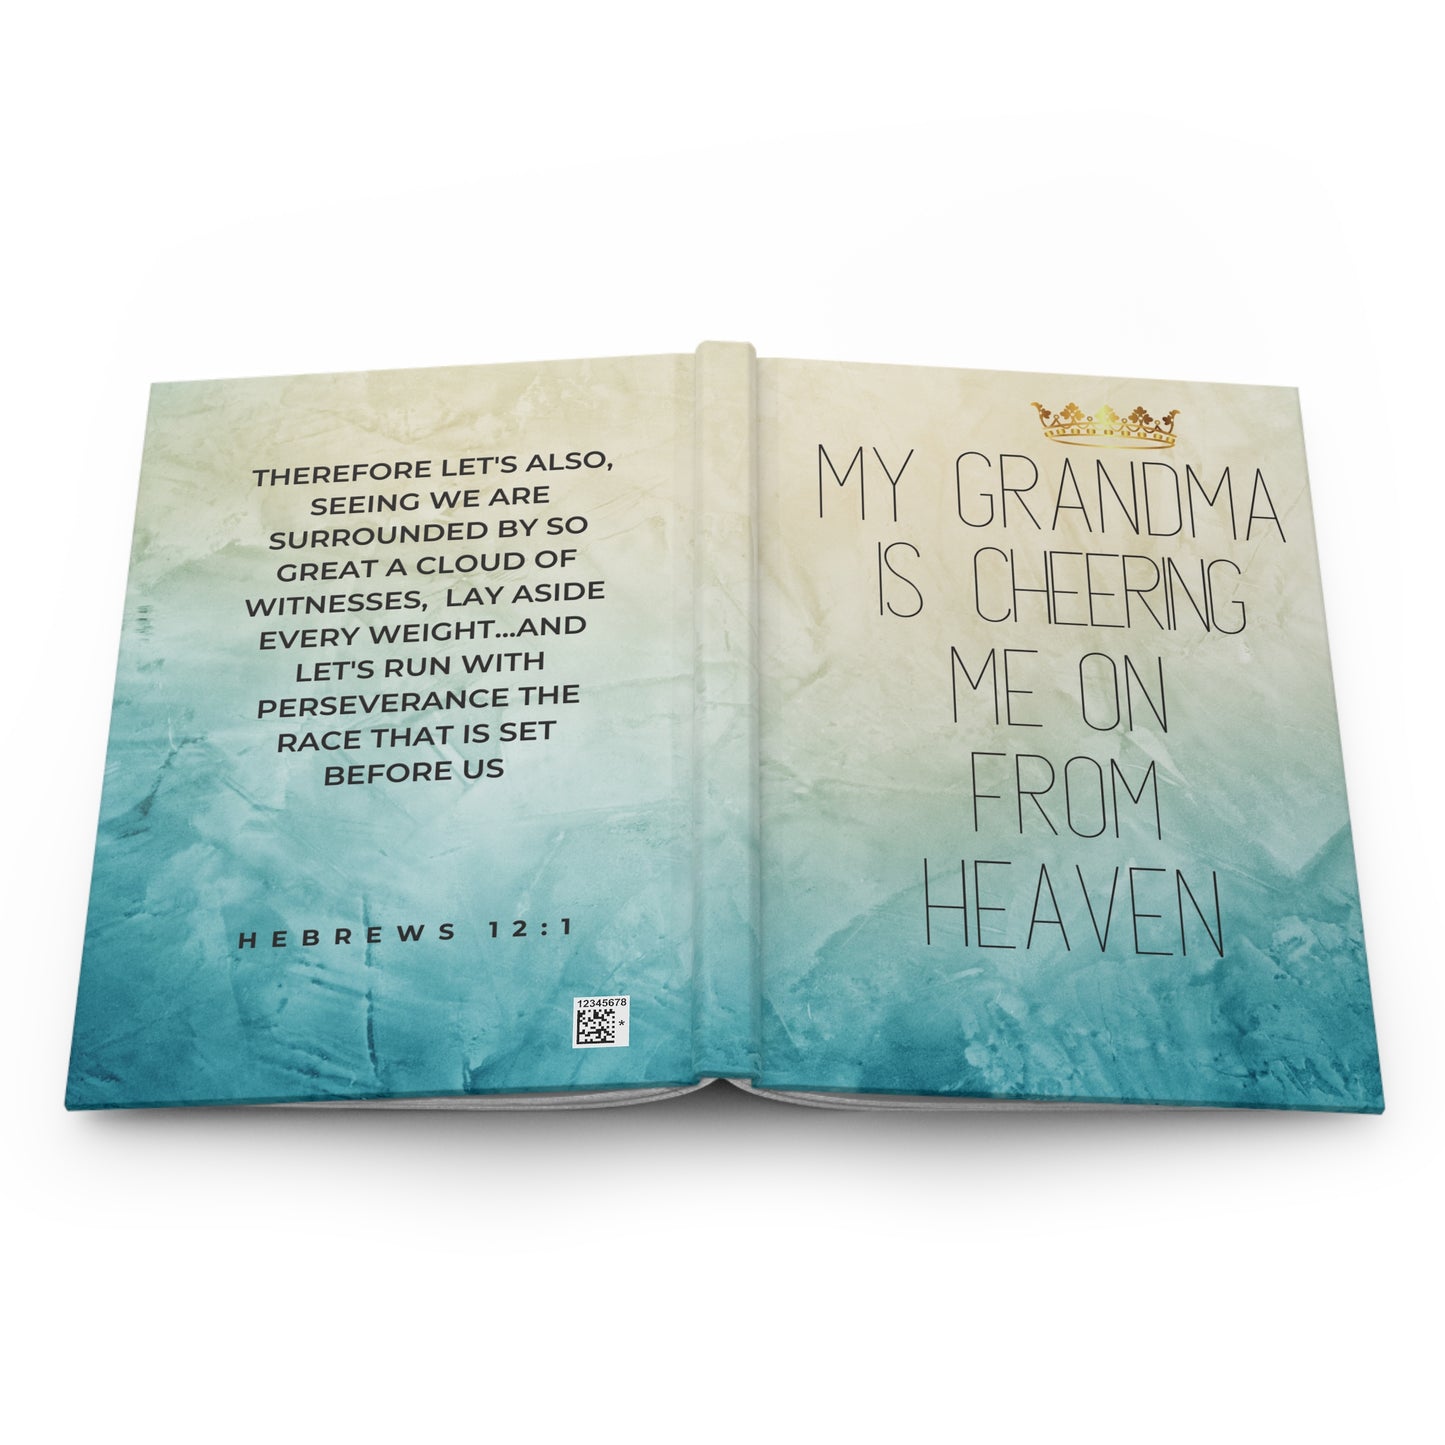 Grief Journal for Loss of Grandma, Cheering Me On From Heaven